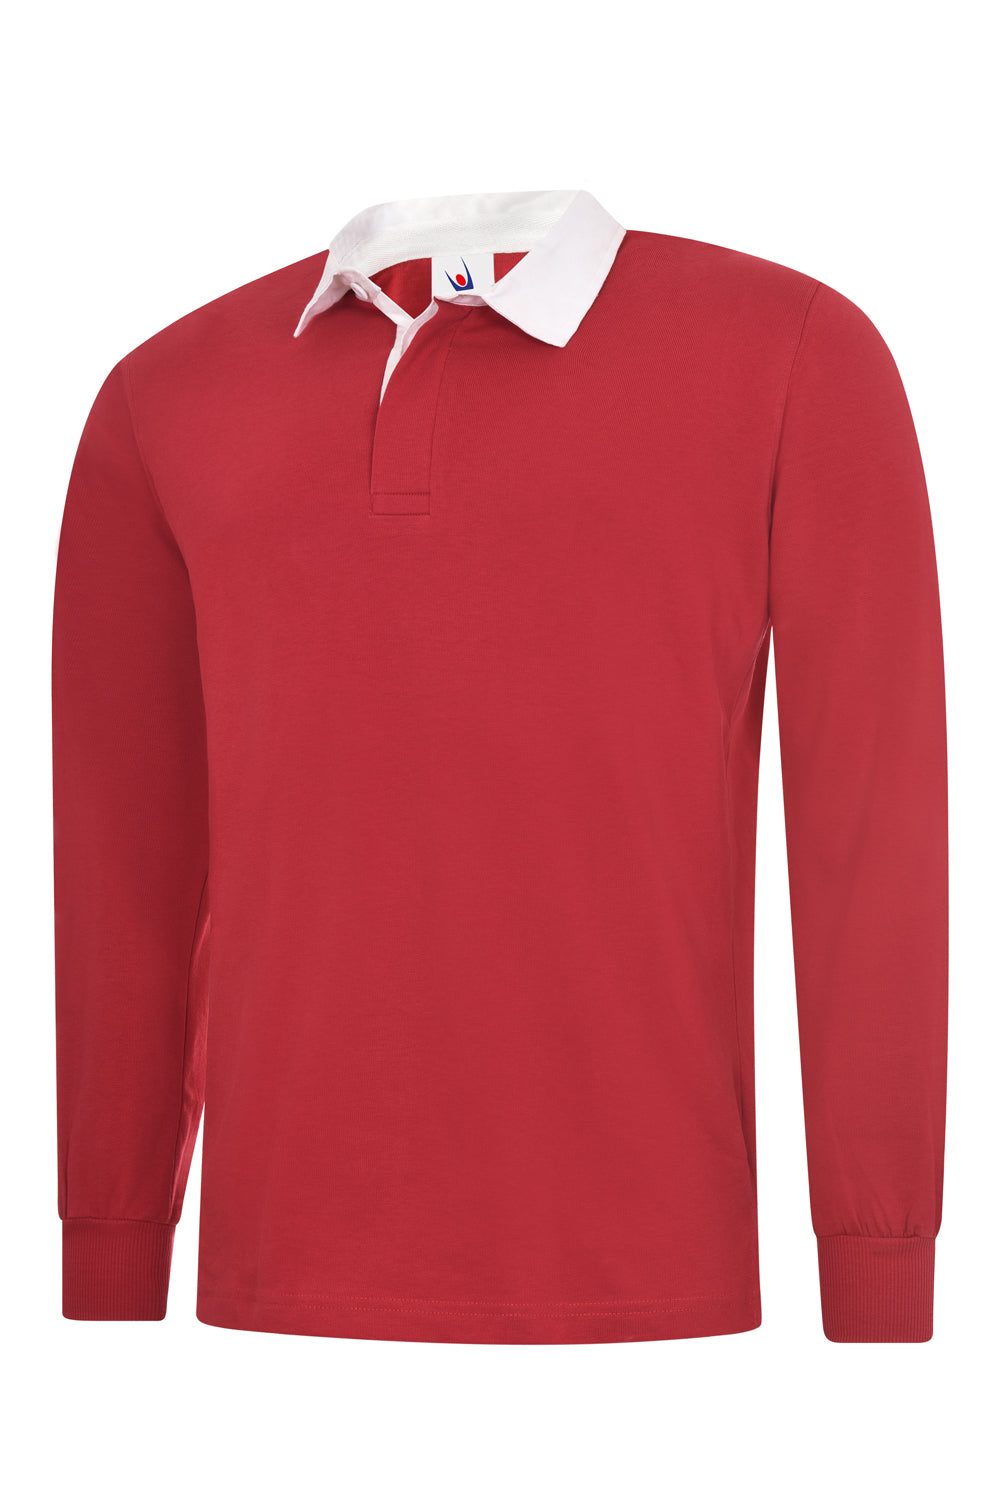 Uneek Classic Rugby Shirt UC402 - Red